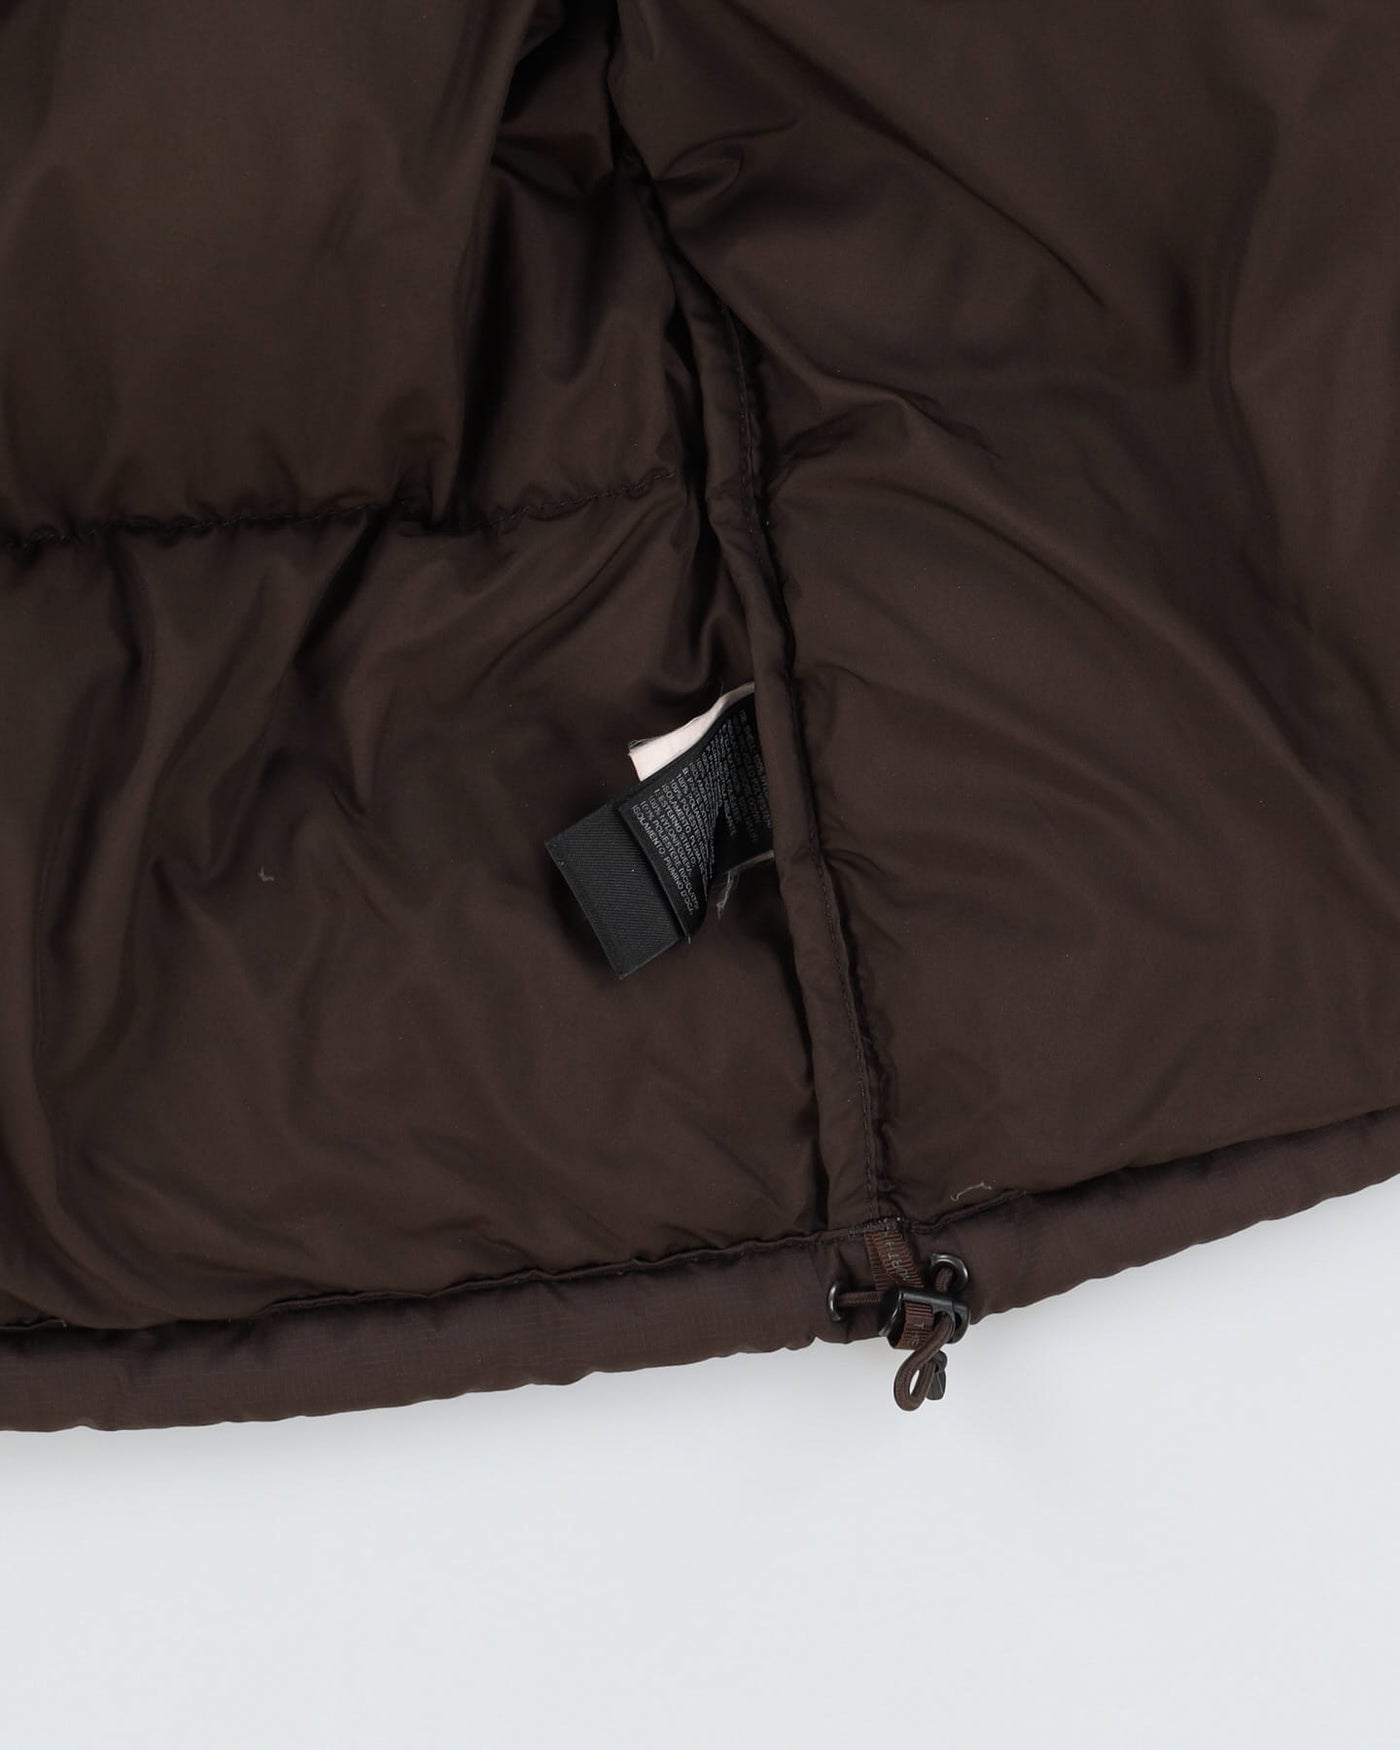 The North Face Brown Nupste 700 Puffer Jacket - M